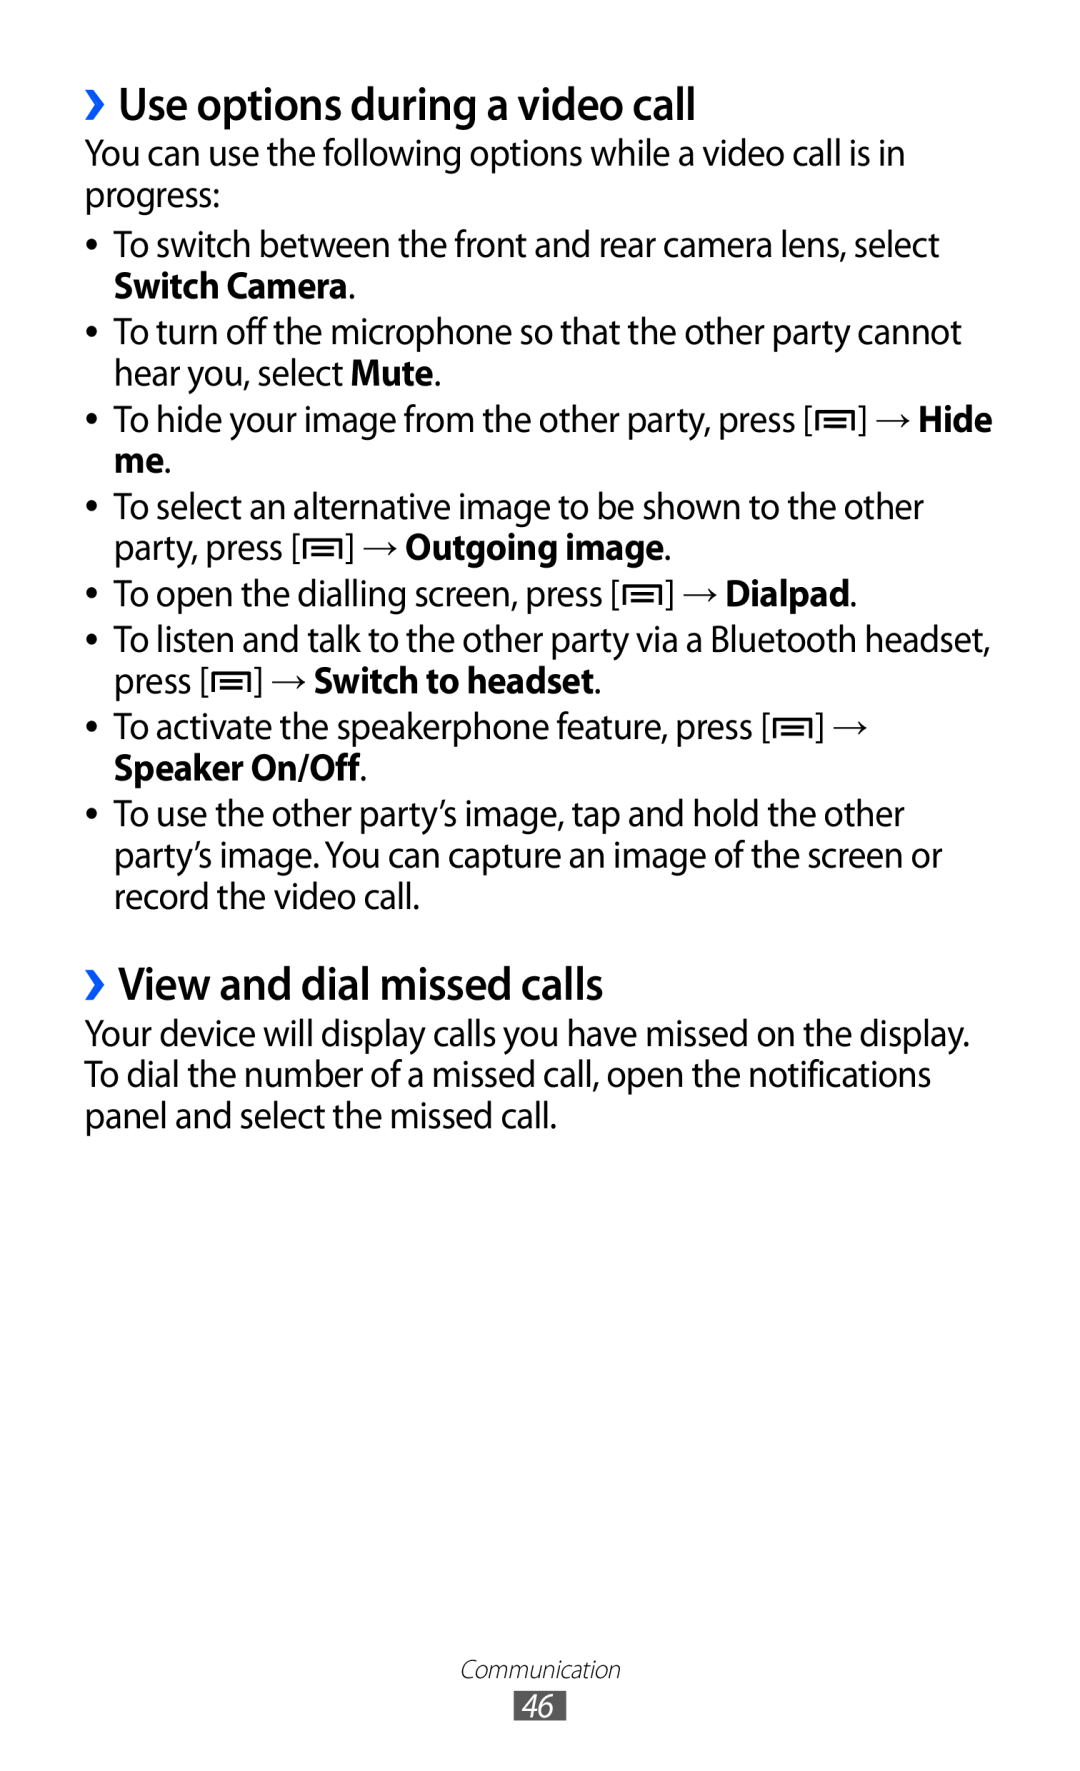 Samsung GT-I9070 user manual ››Use options during a video call, ››View and dial missed calls 